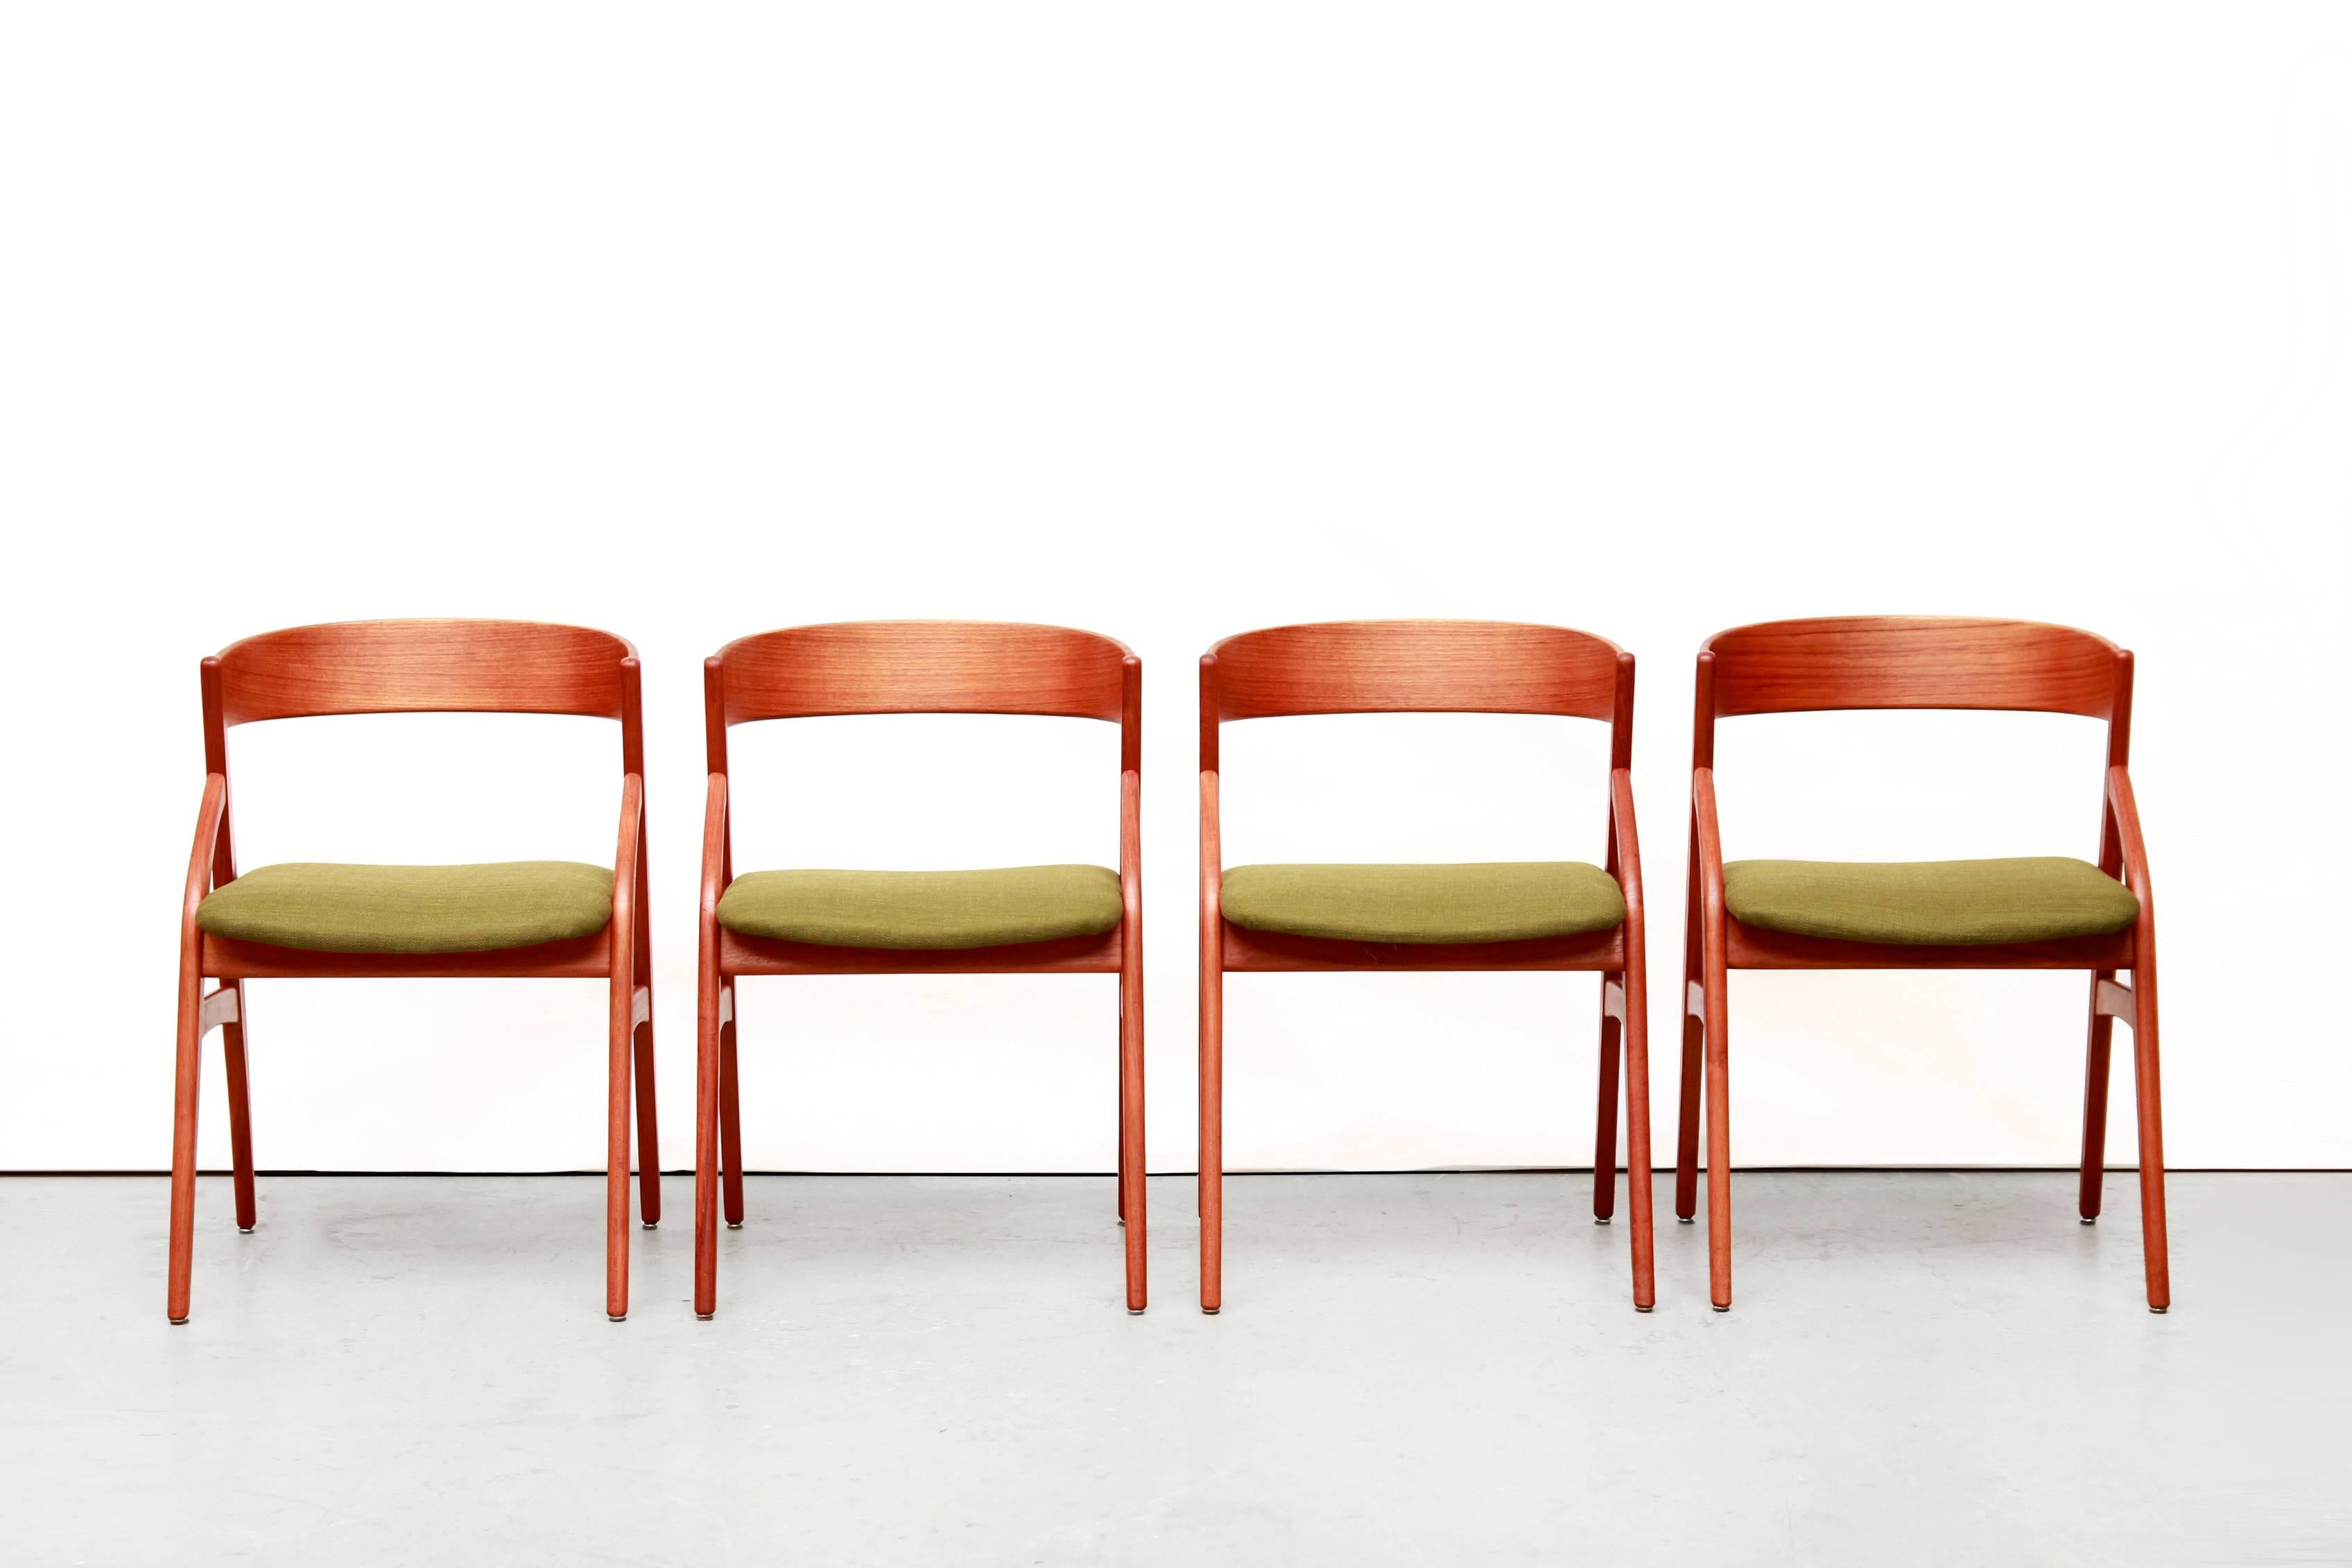 Beautiful set of four teak dining room chairs designed by the Danish designer Kai Kristiansen. These organically designed chairs are made of teak veneered plywood back and solid teak frame with green upholstered seats. These chairs are of high